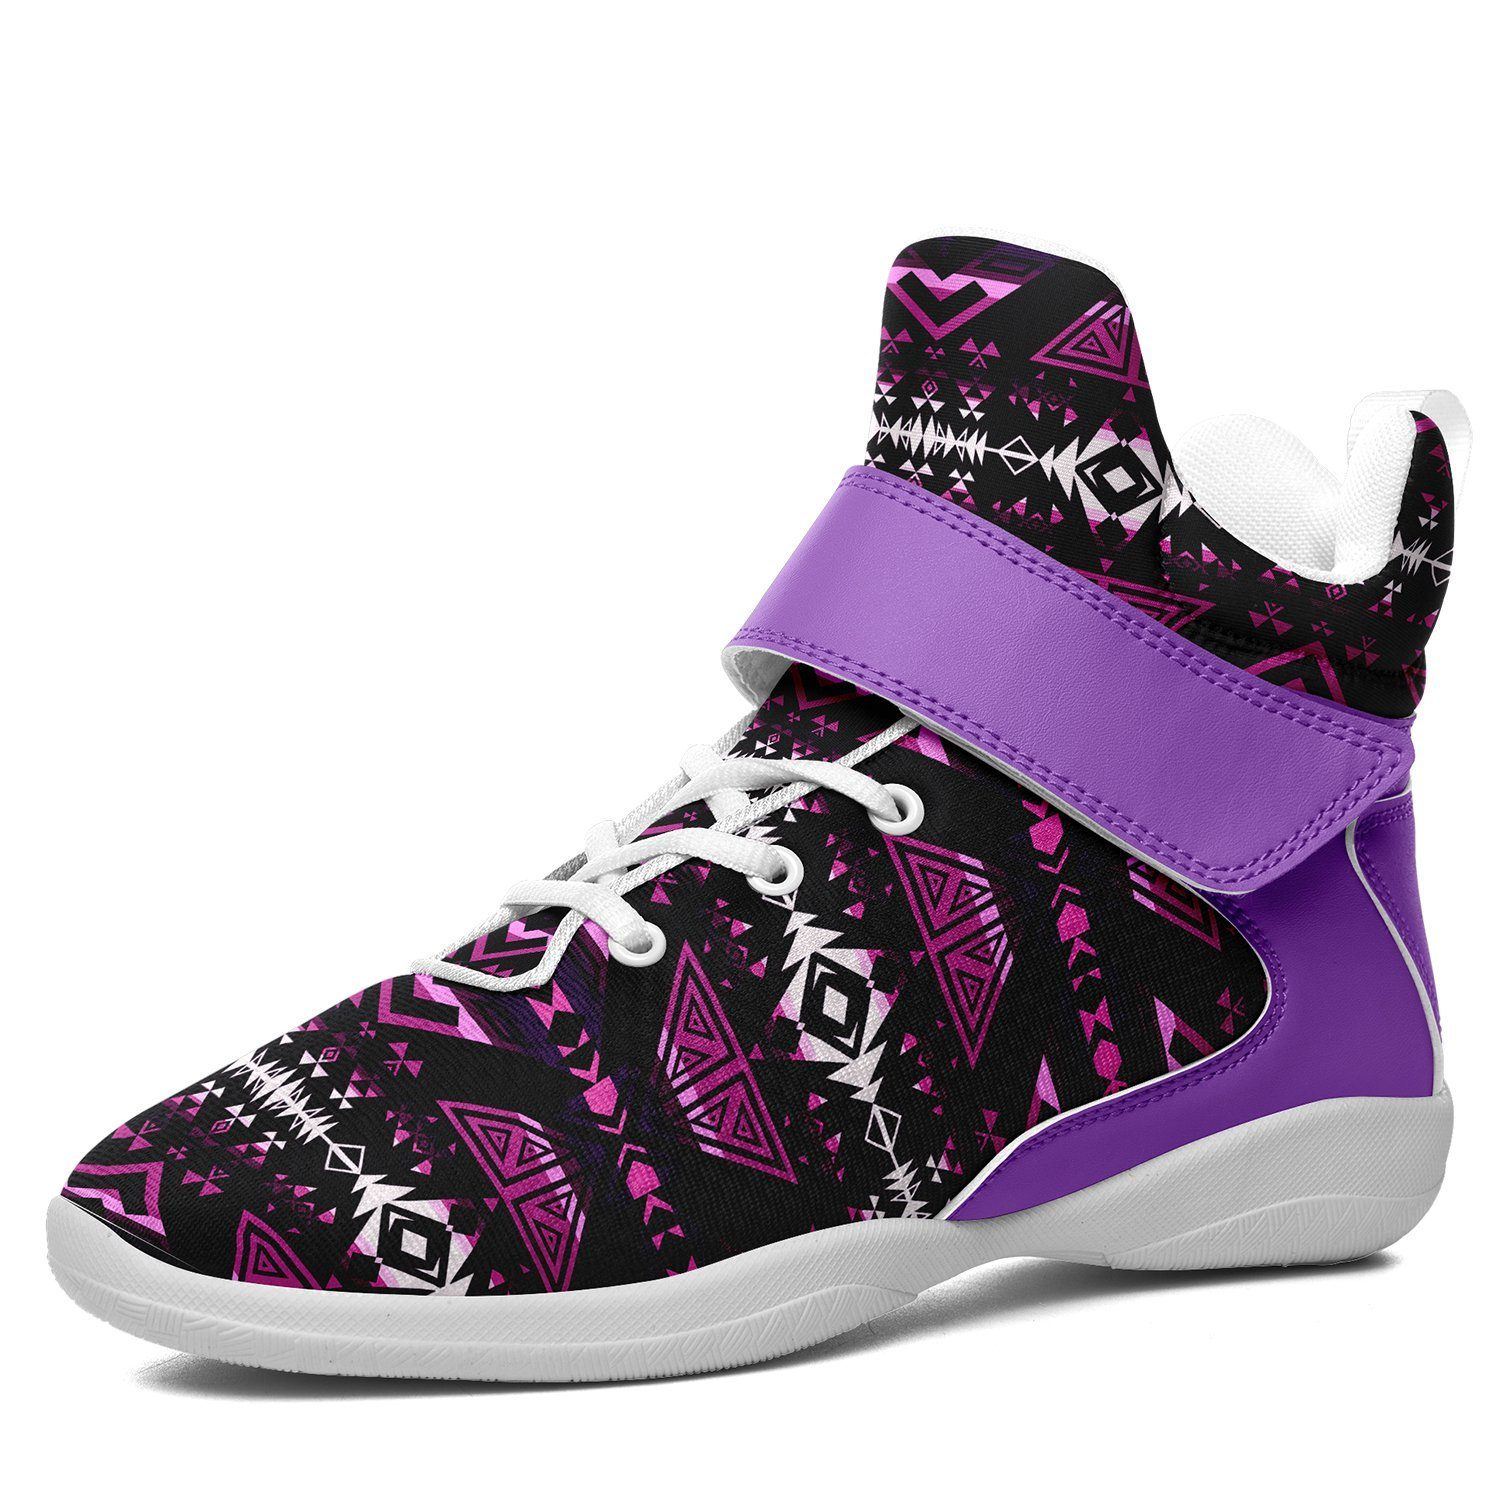 Upstream Expedition Moonlight Shadows Ipottaa Basketball / Sport High Top Shoes - White Sole 49 Dzine US Men 7 / EUR 40 White Sole with Lavender Strap 